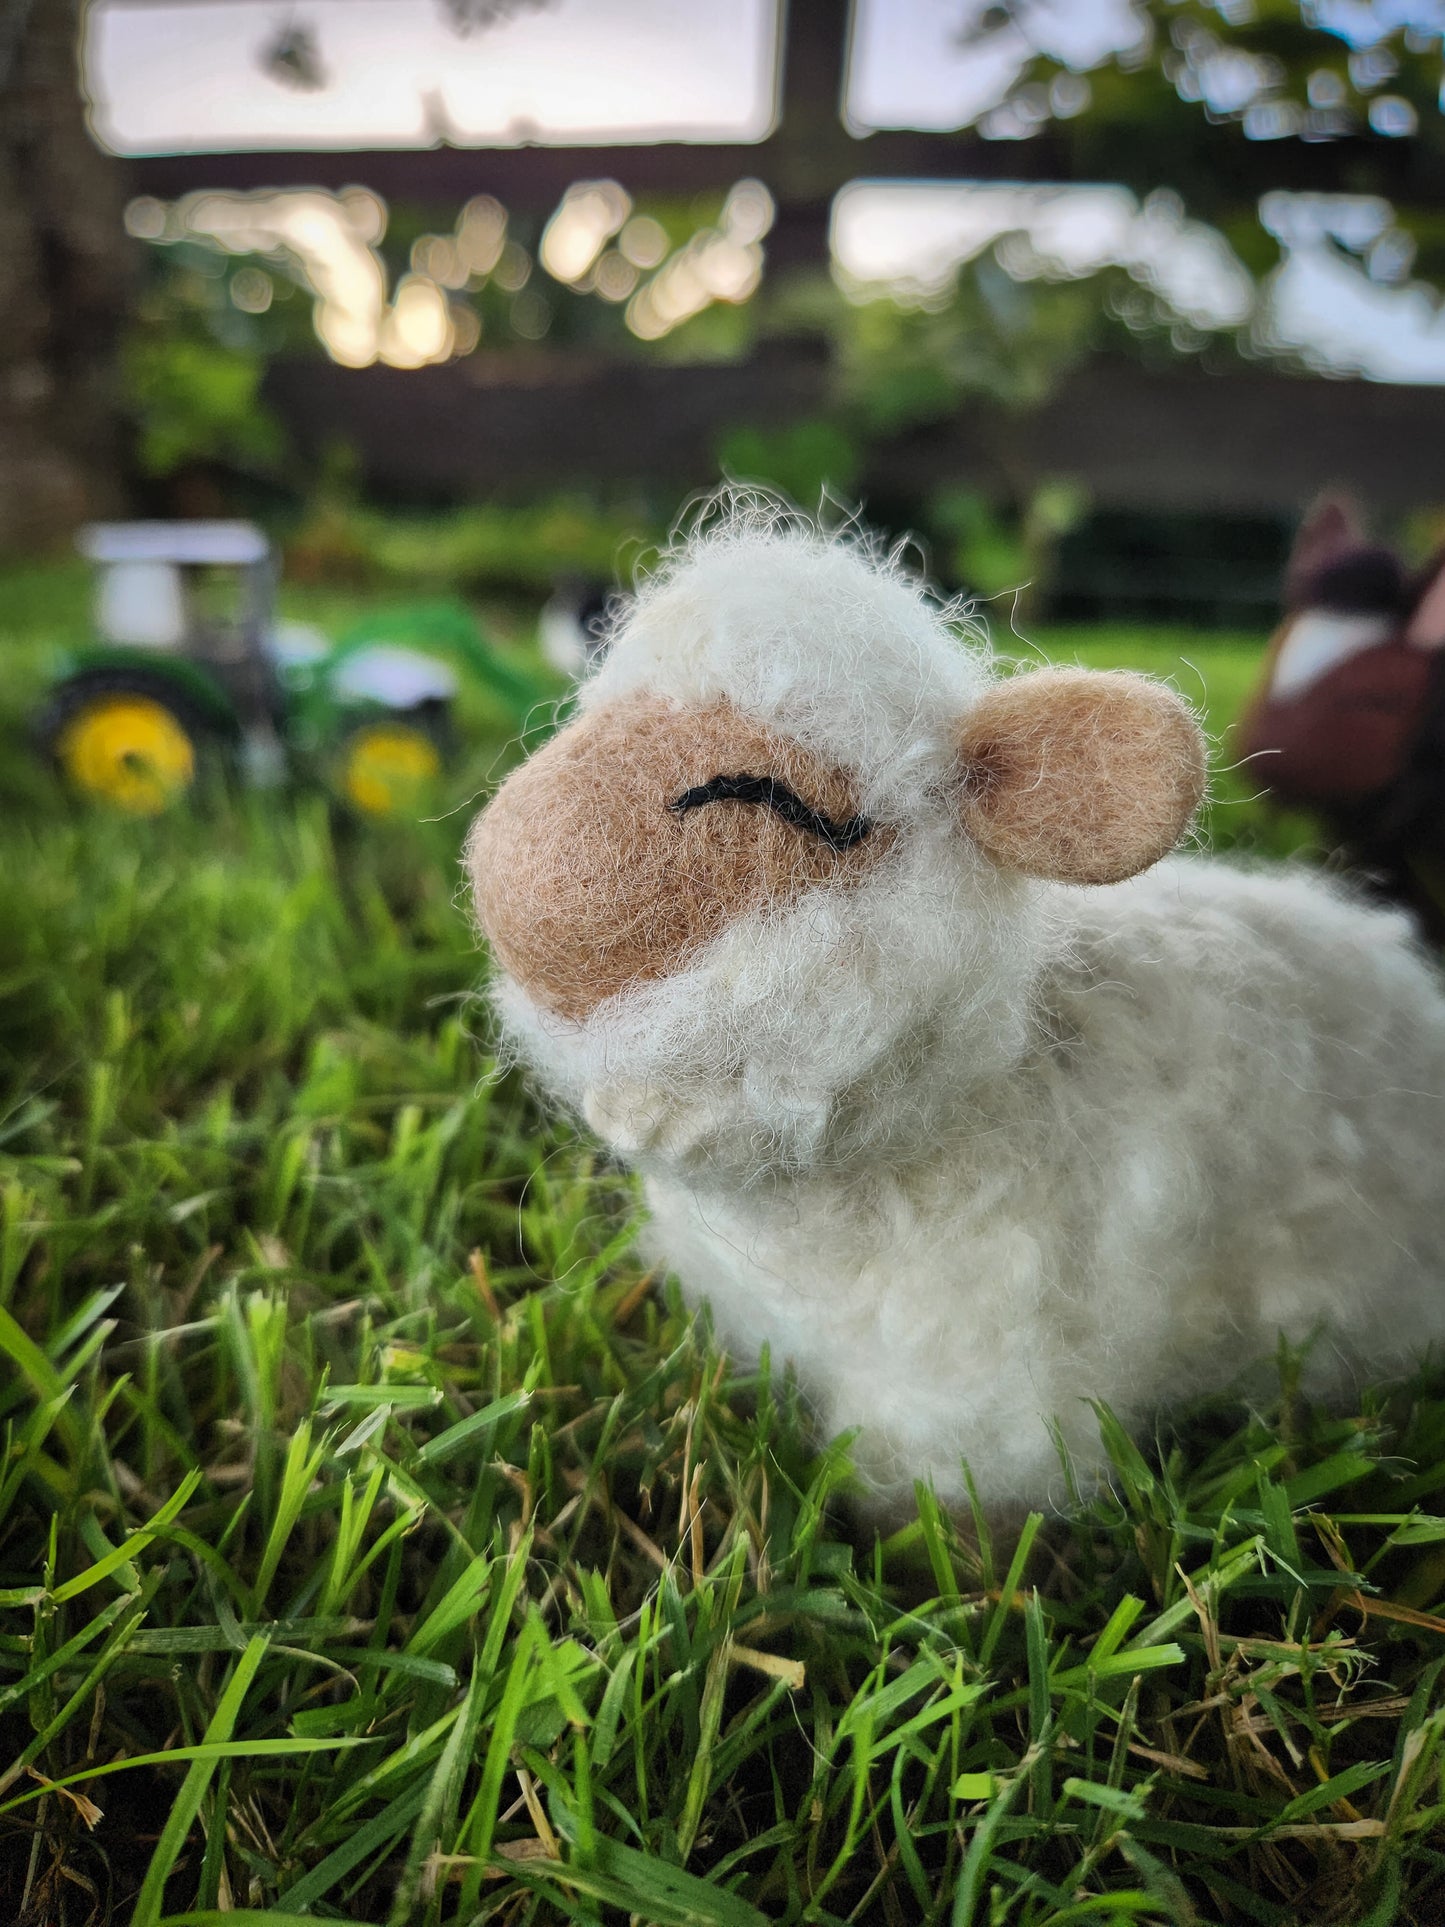 Sally the Sheep - Felt Toy Sheep side view